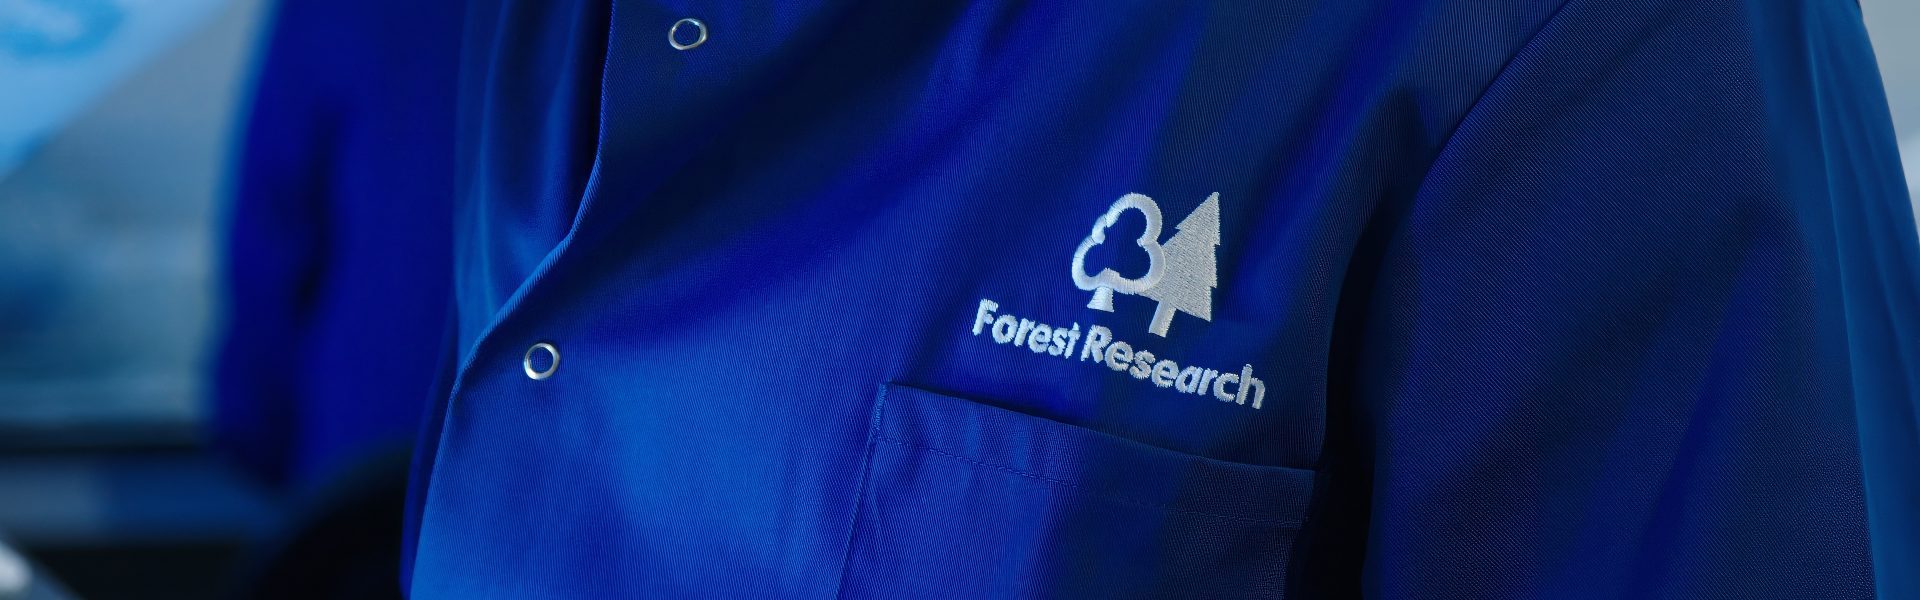 A Forest Research scientist wears a blue lab coat with the organisation logo visible.